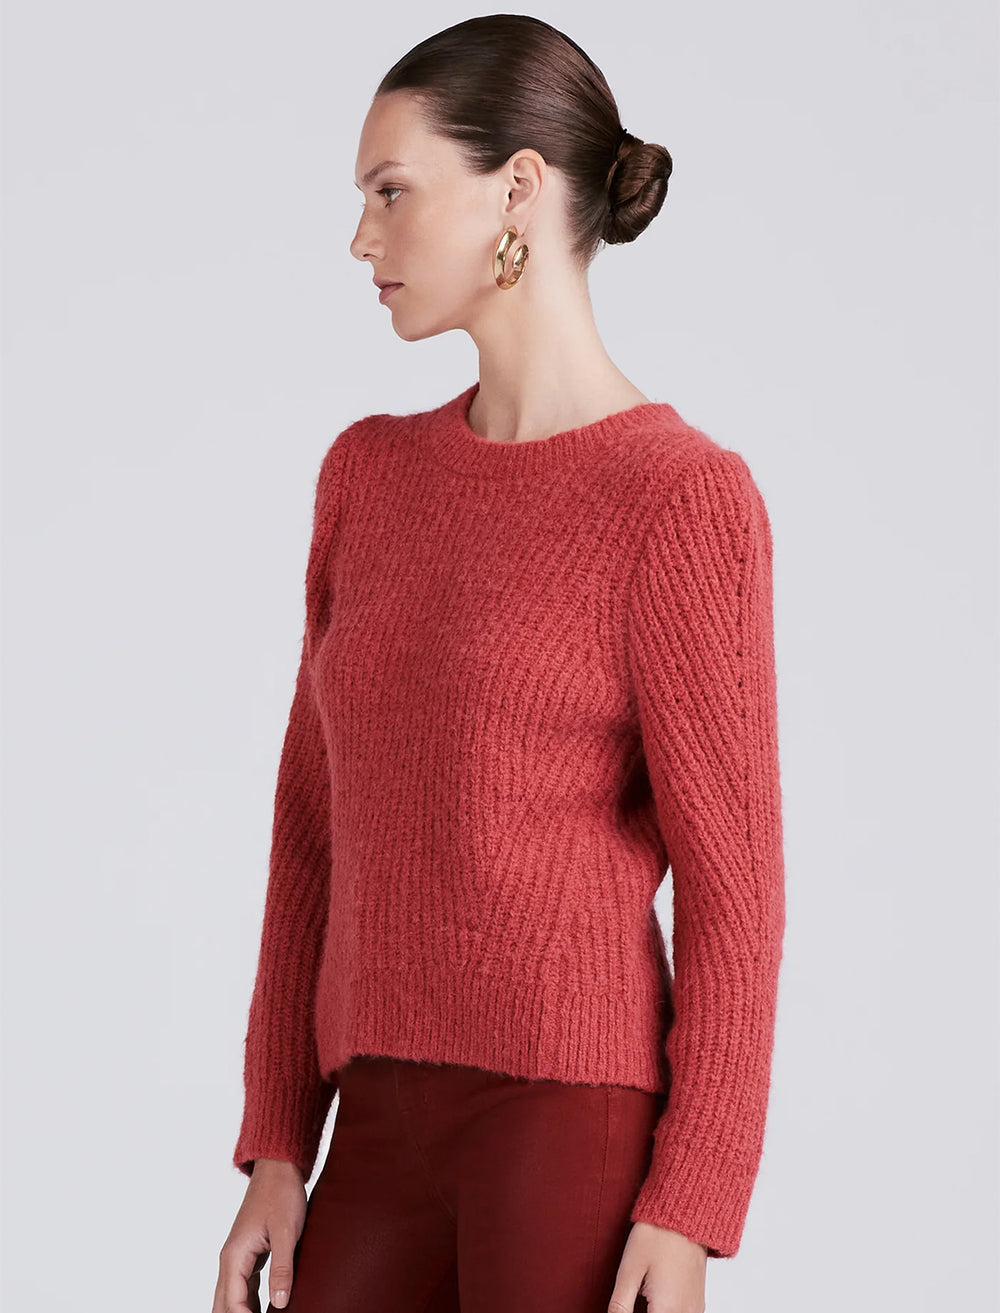 model wearing ryan pullover sweater in rhubarb with matching pants